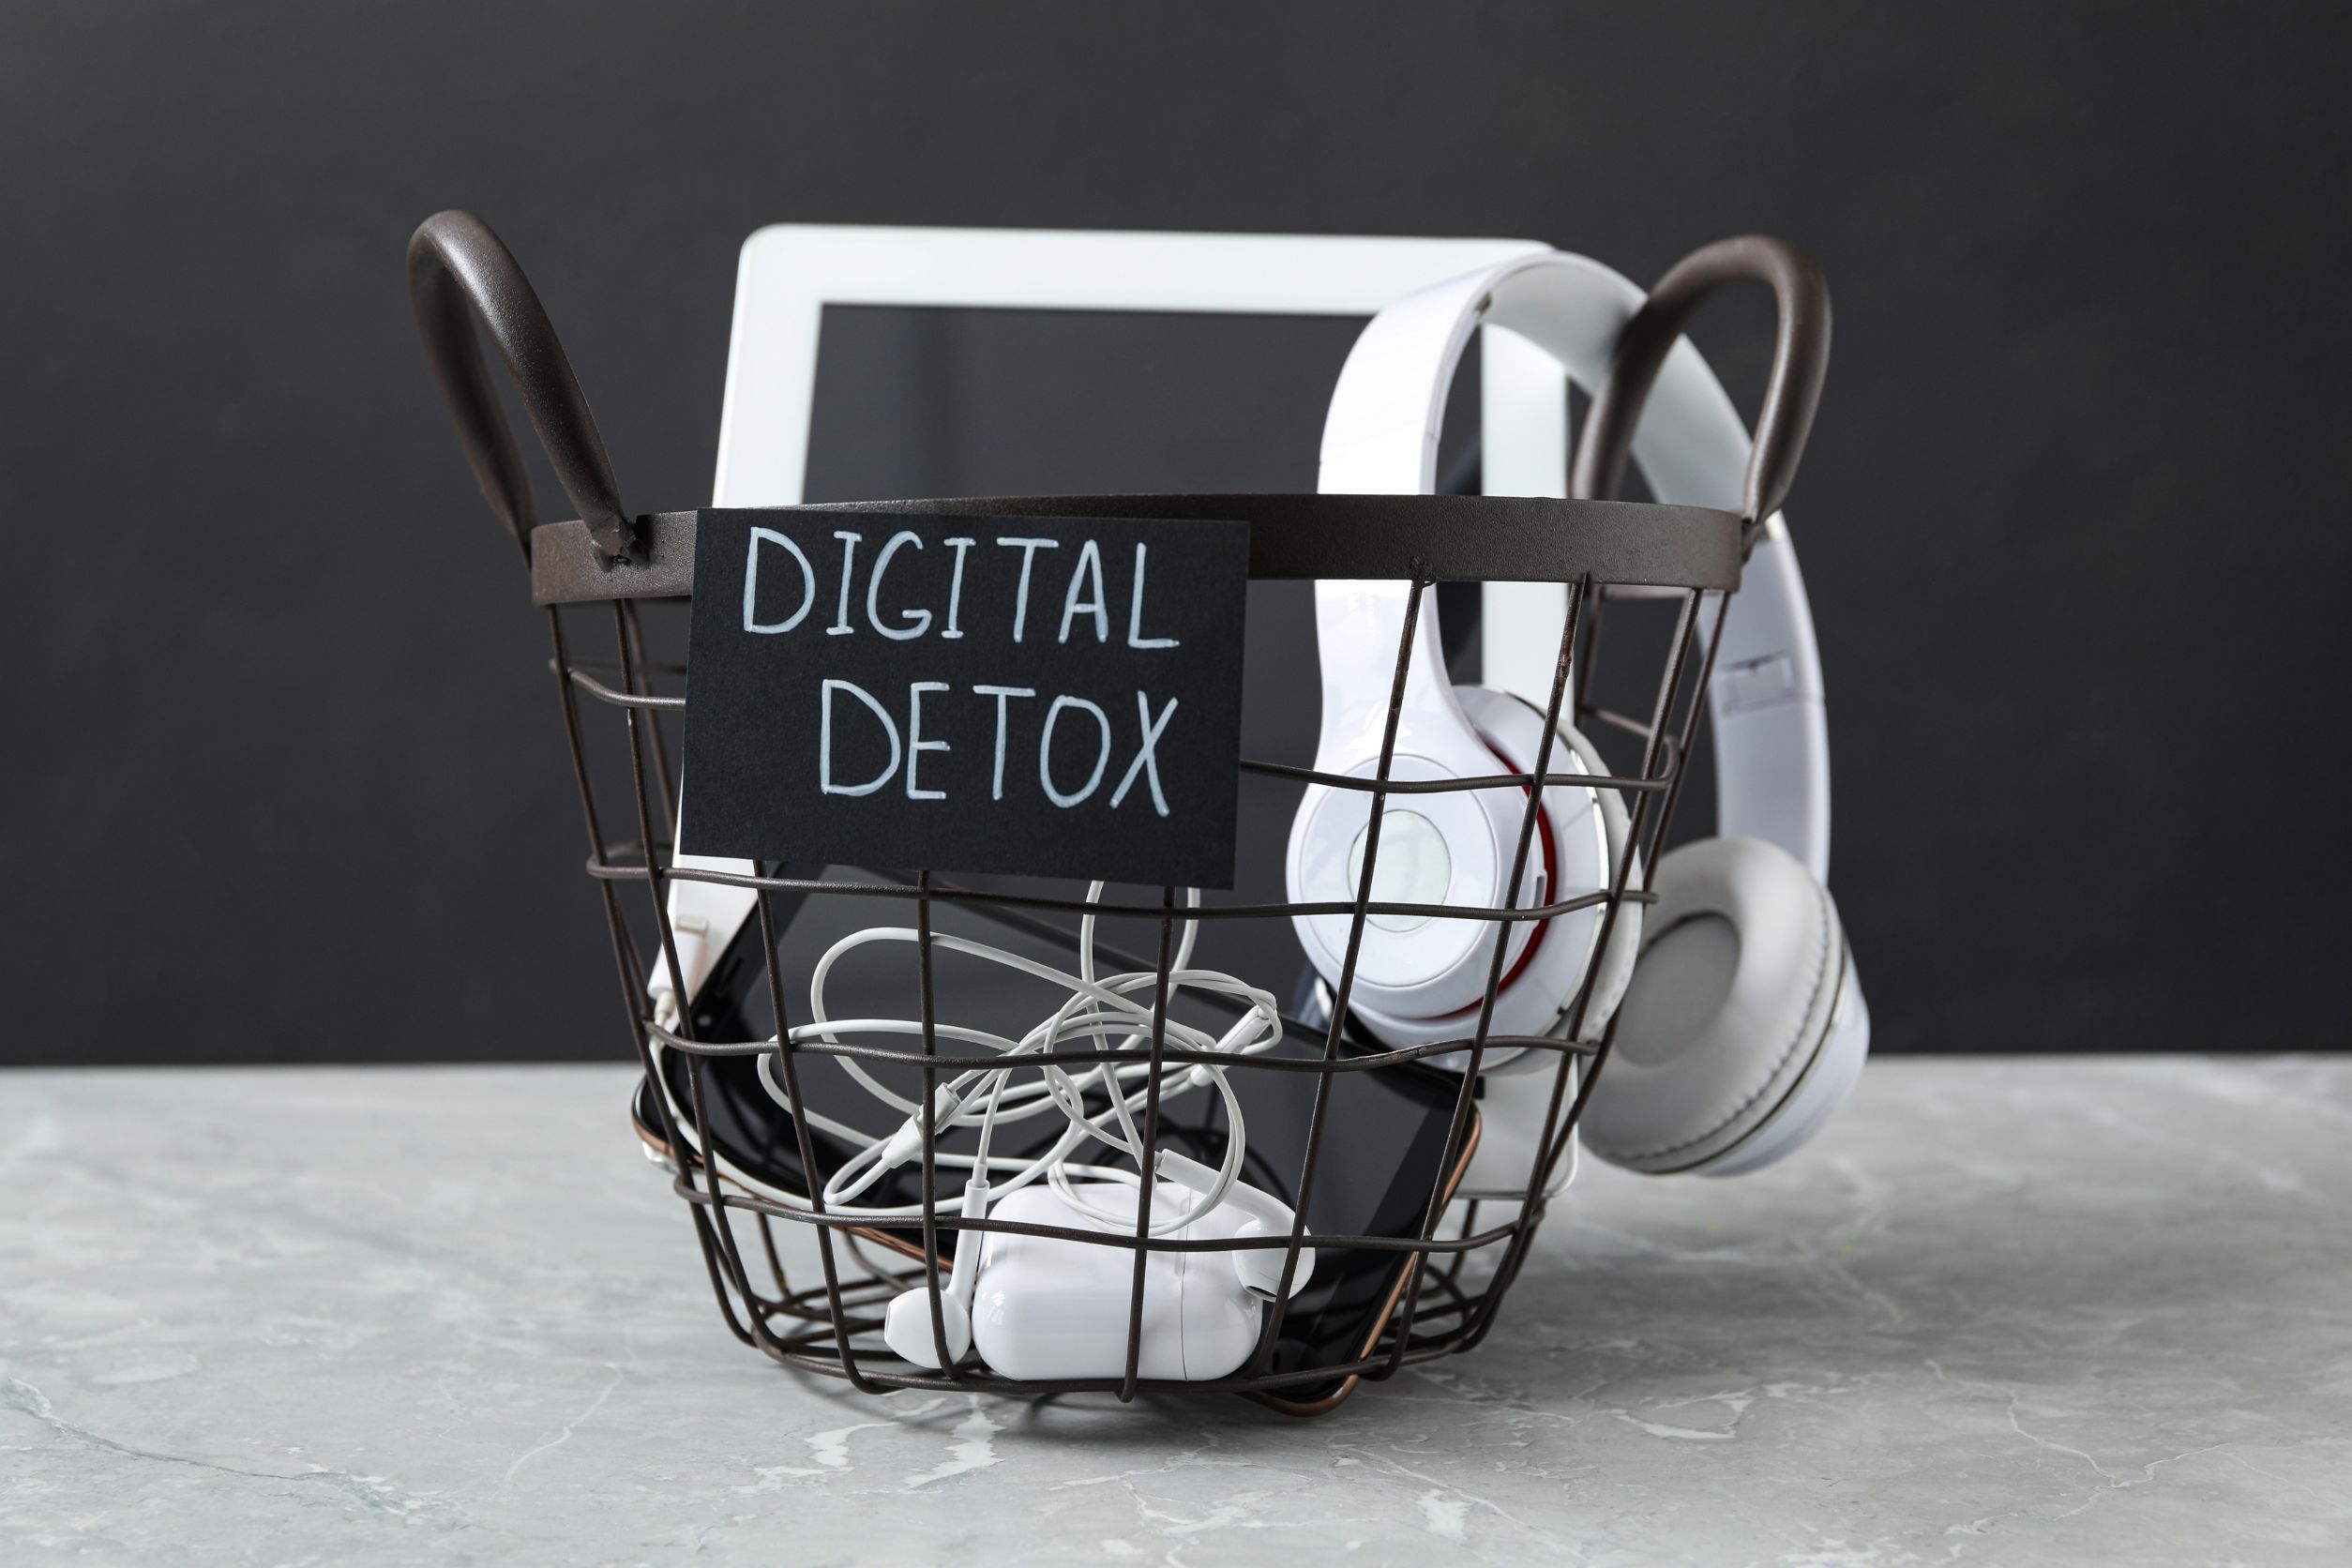 Digital Detoxes to the Extreme